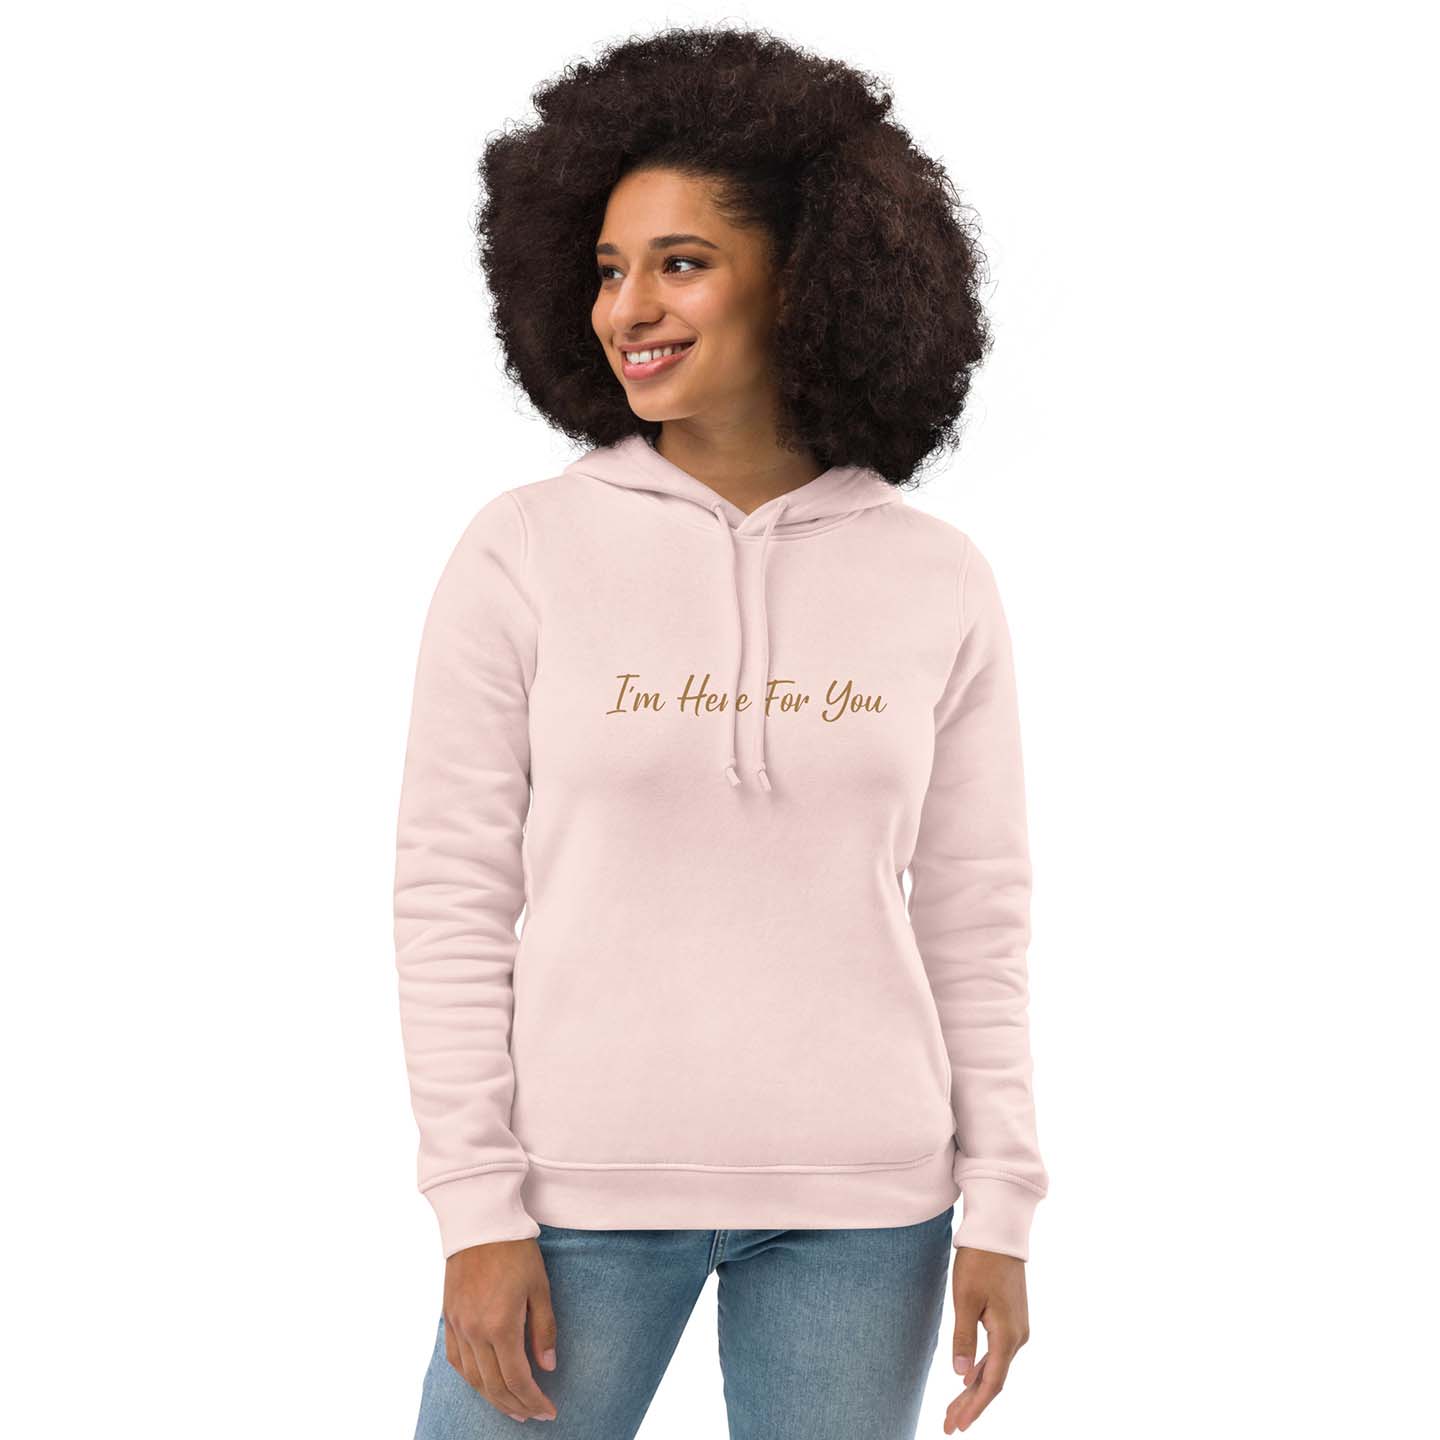 Women pink inspirational hoodie with inspirational quote, "I'm Here For You."